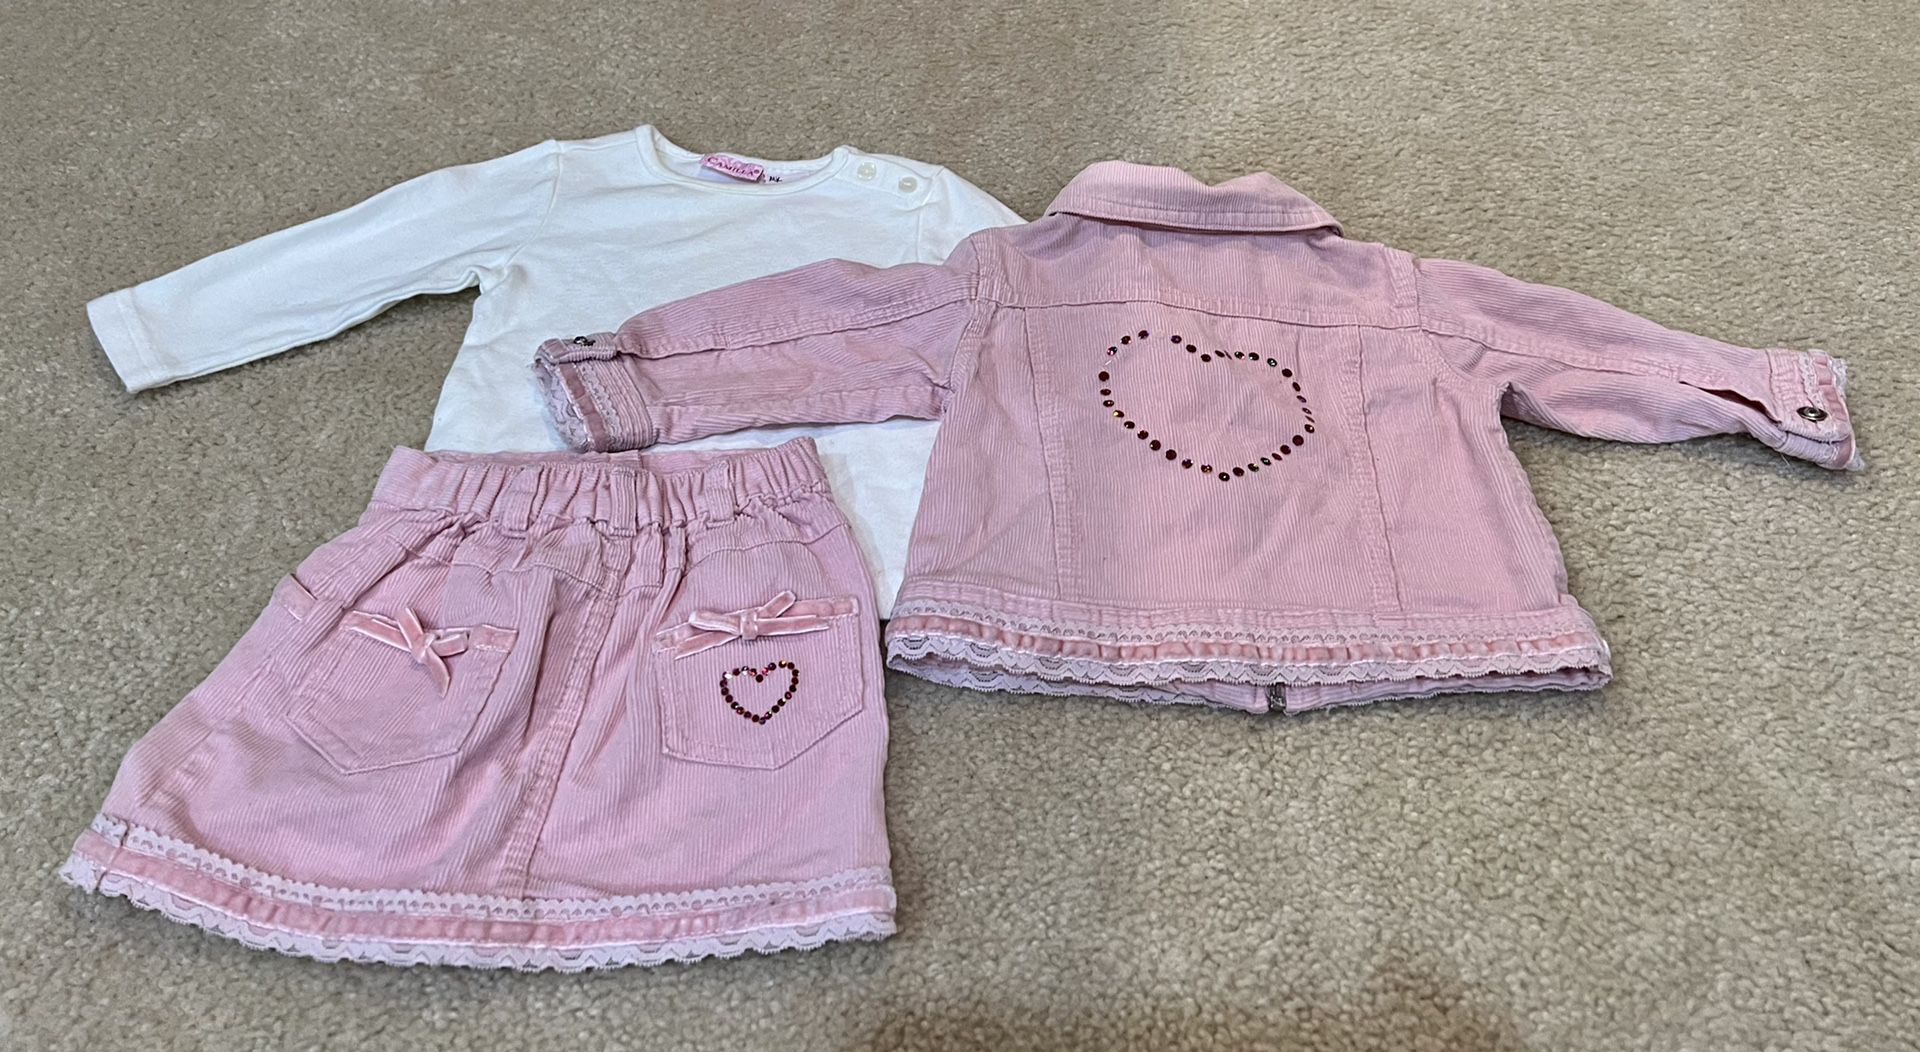 Toddler Girl 3 Piece Outfit Size 12 Months